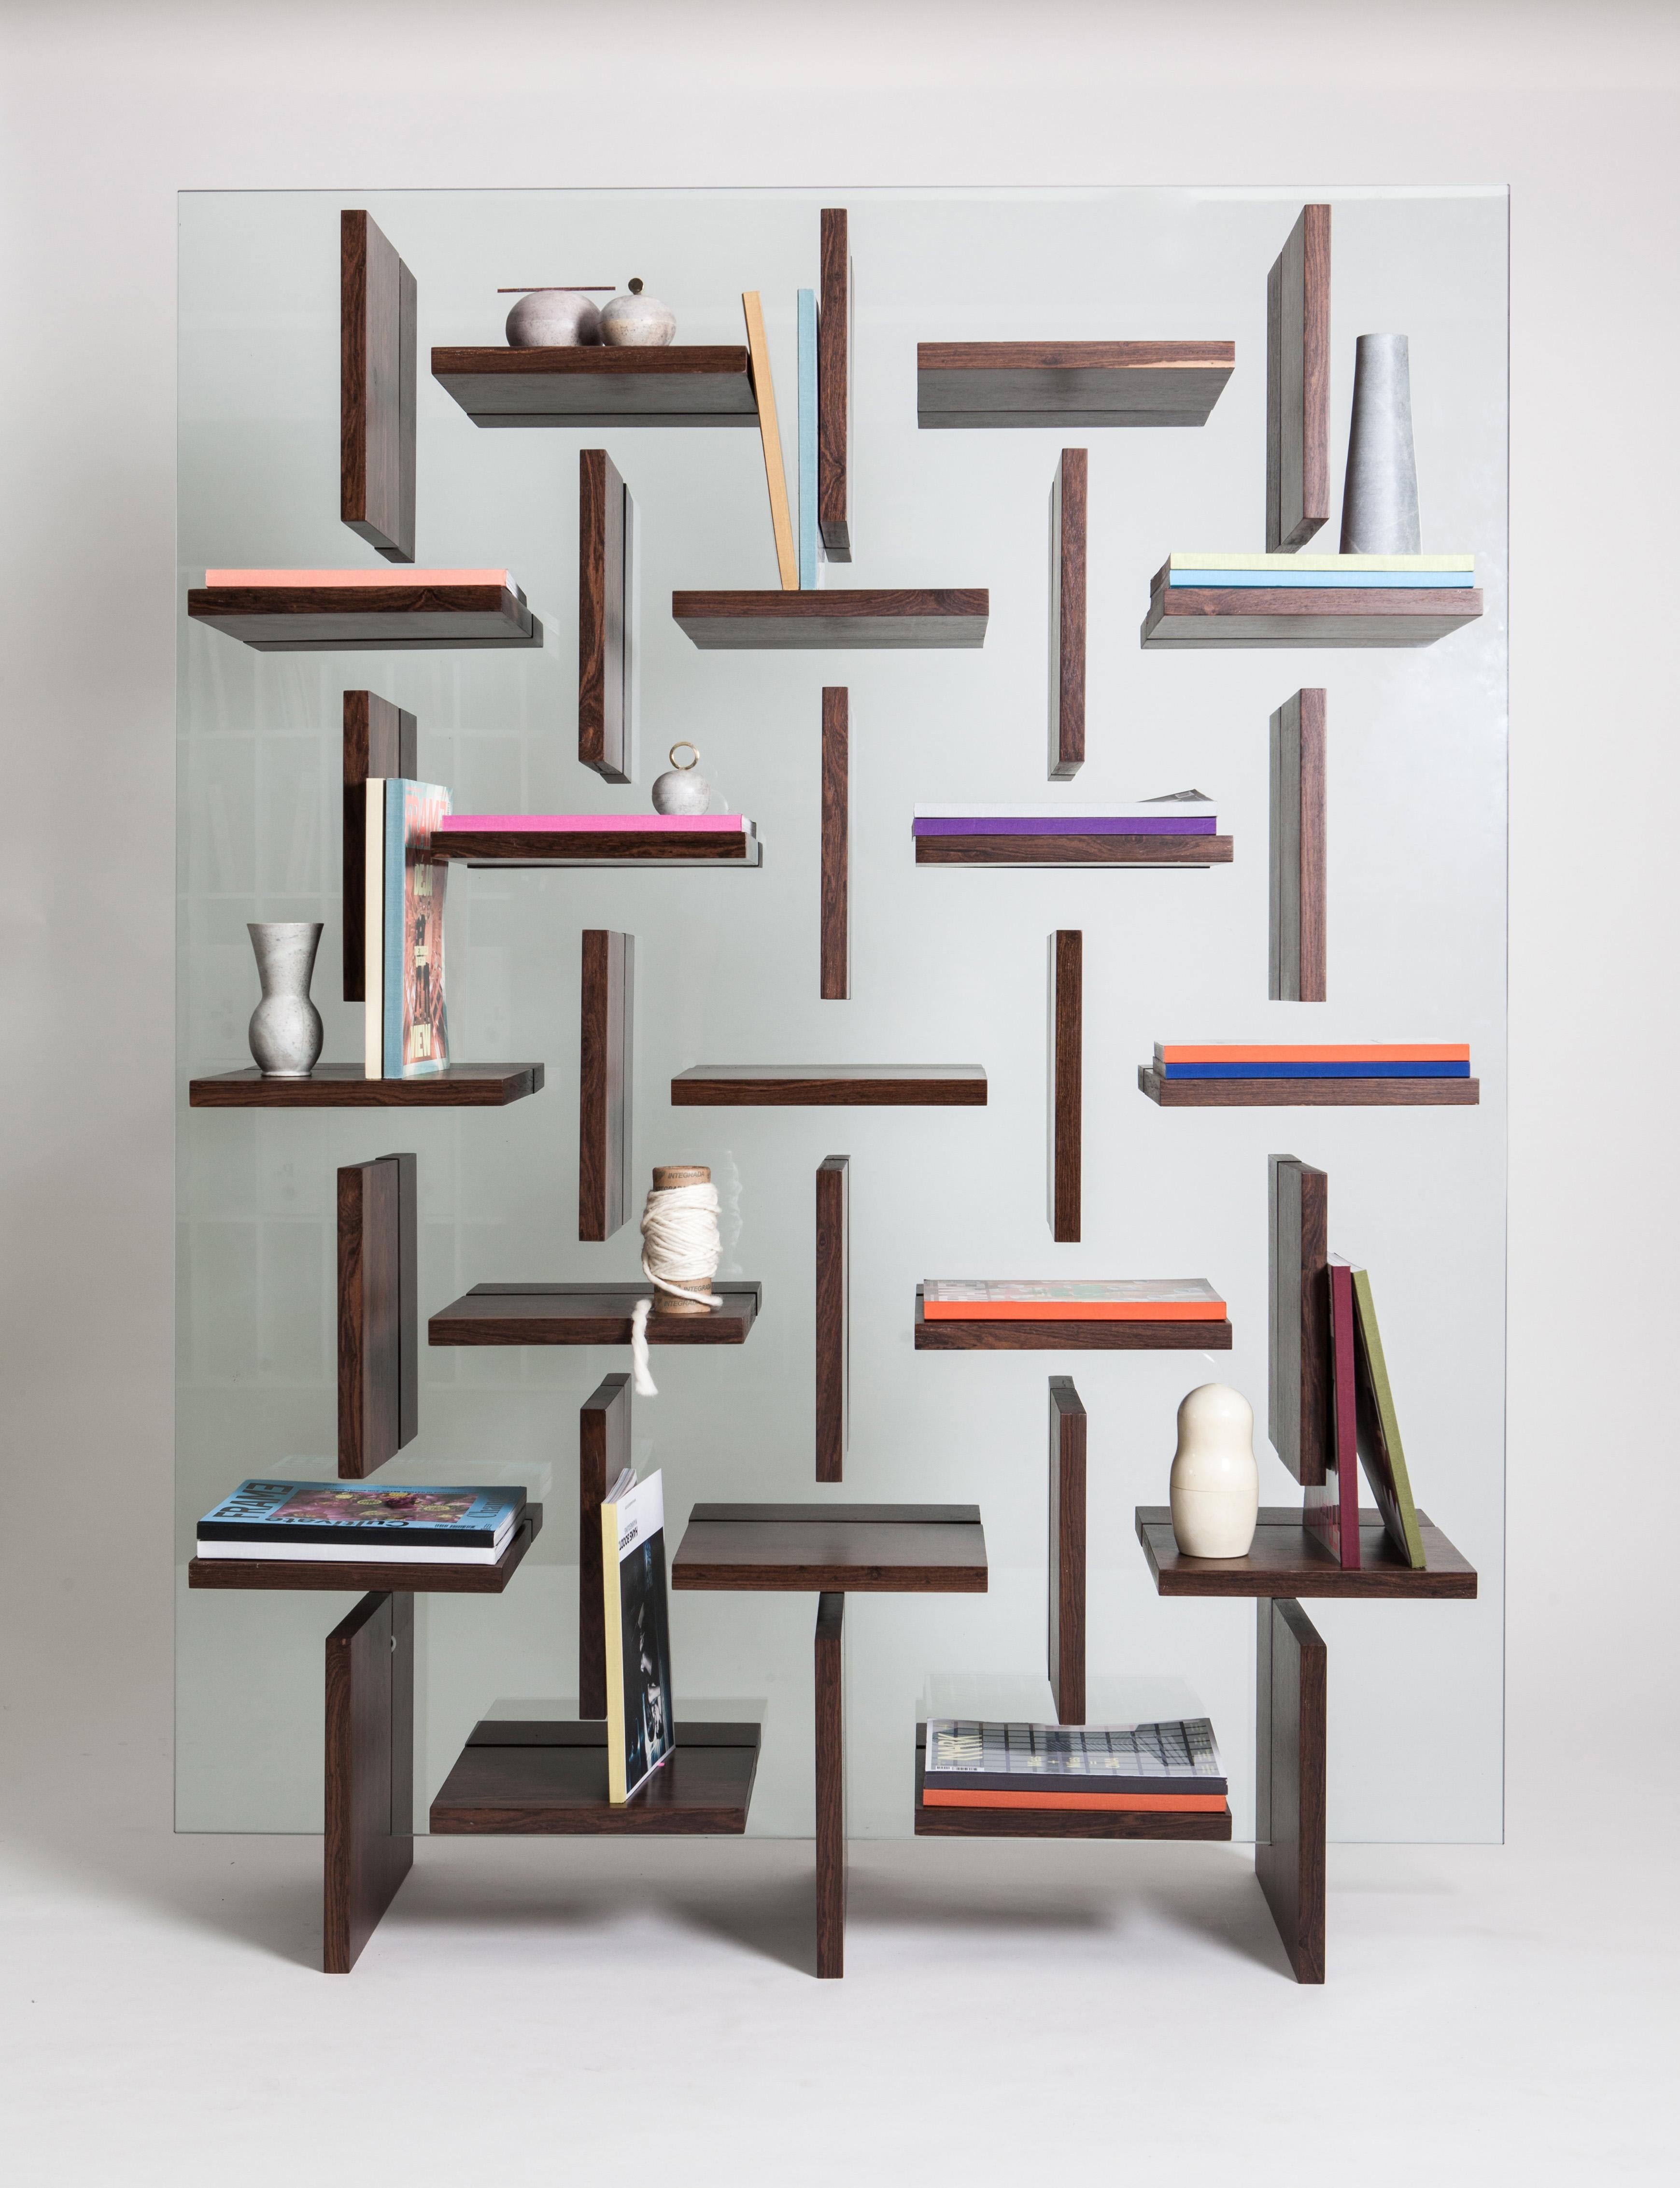 This furniture came from the inversion of an idea, which was to create a shelf that reminds us of a 